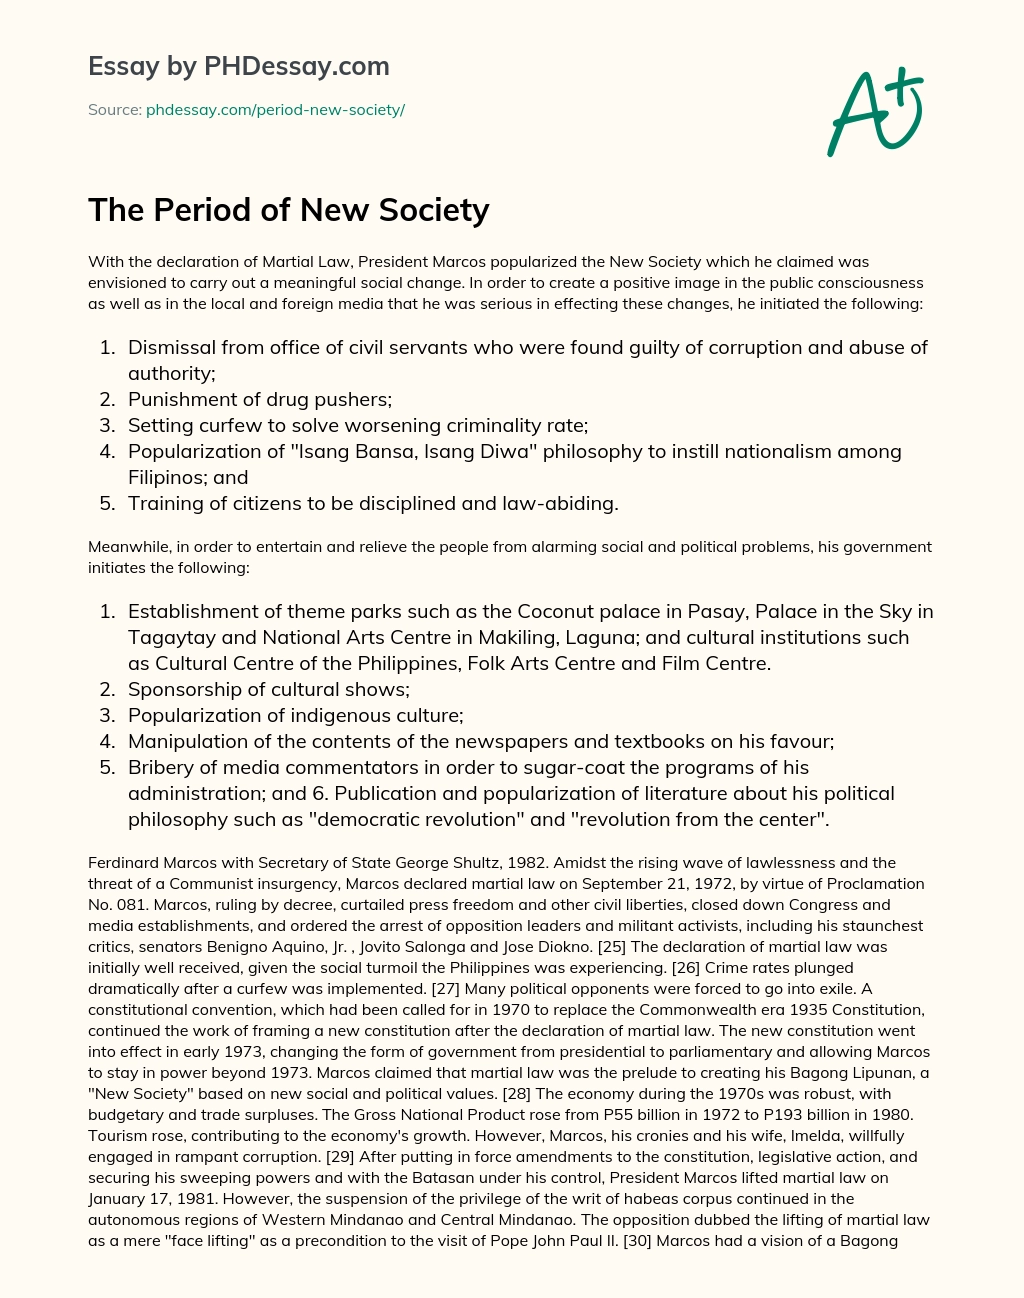 The Period of New Society essay